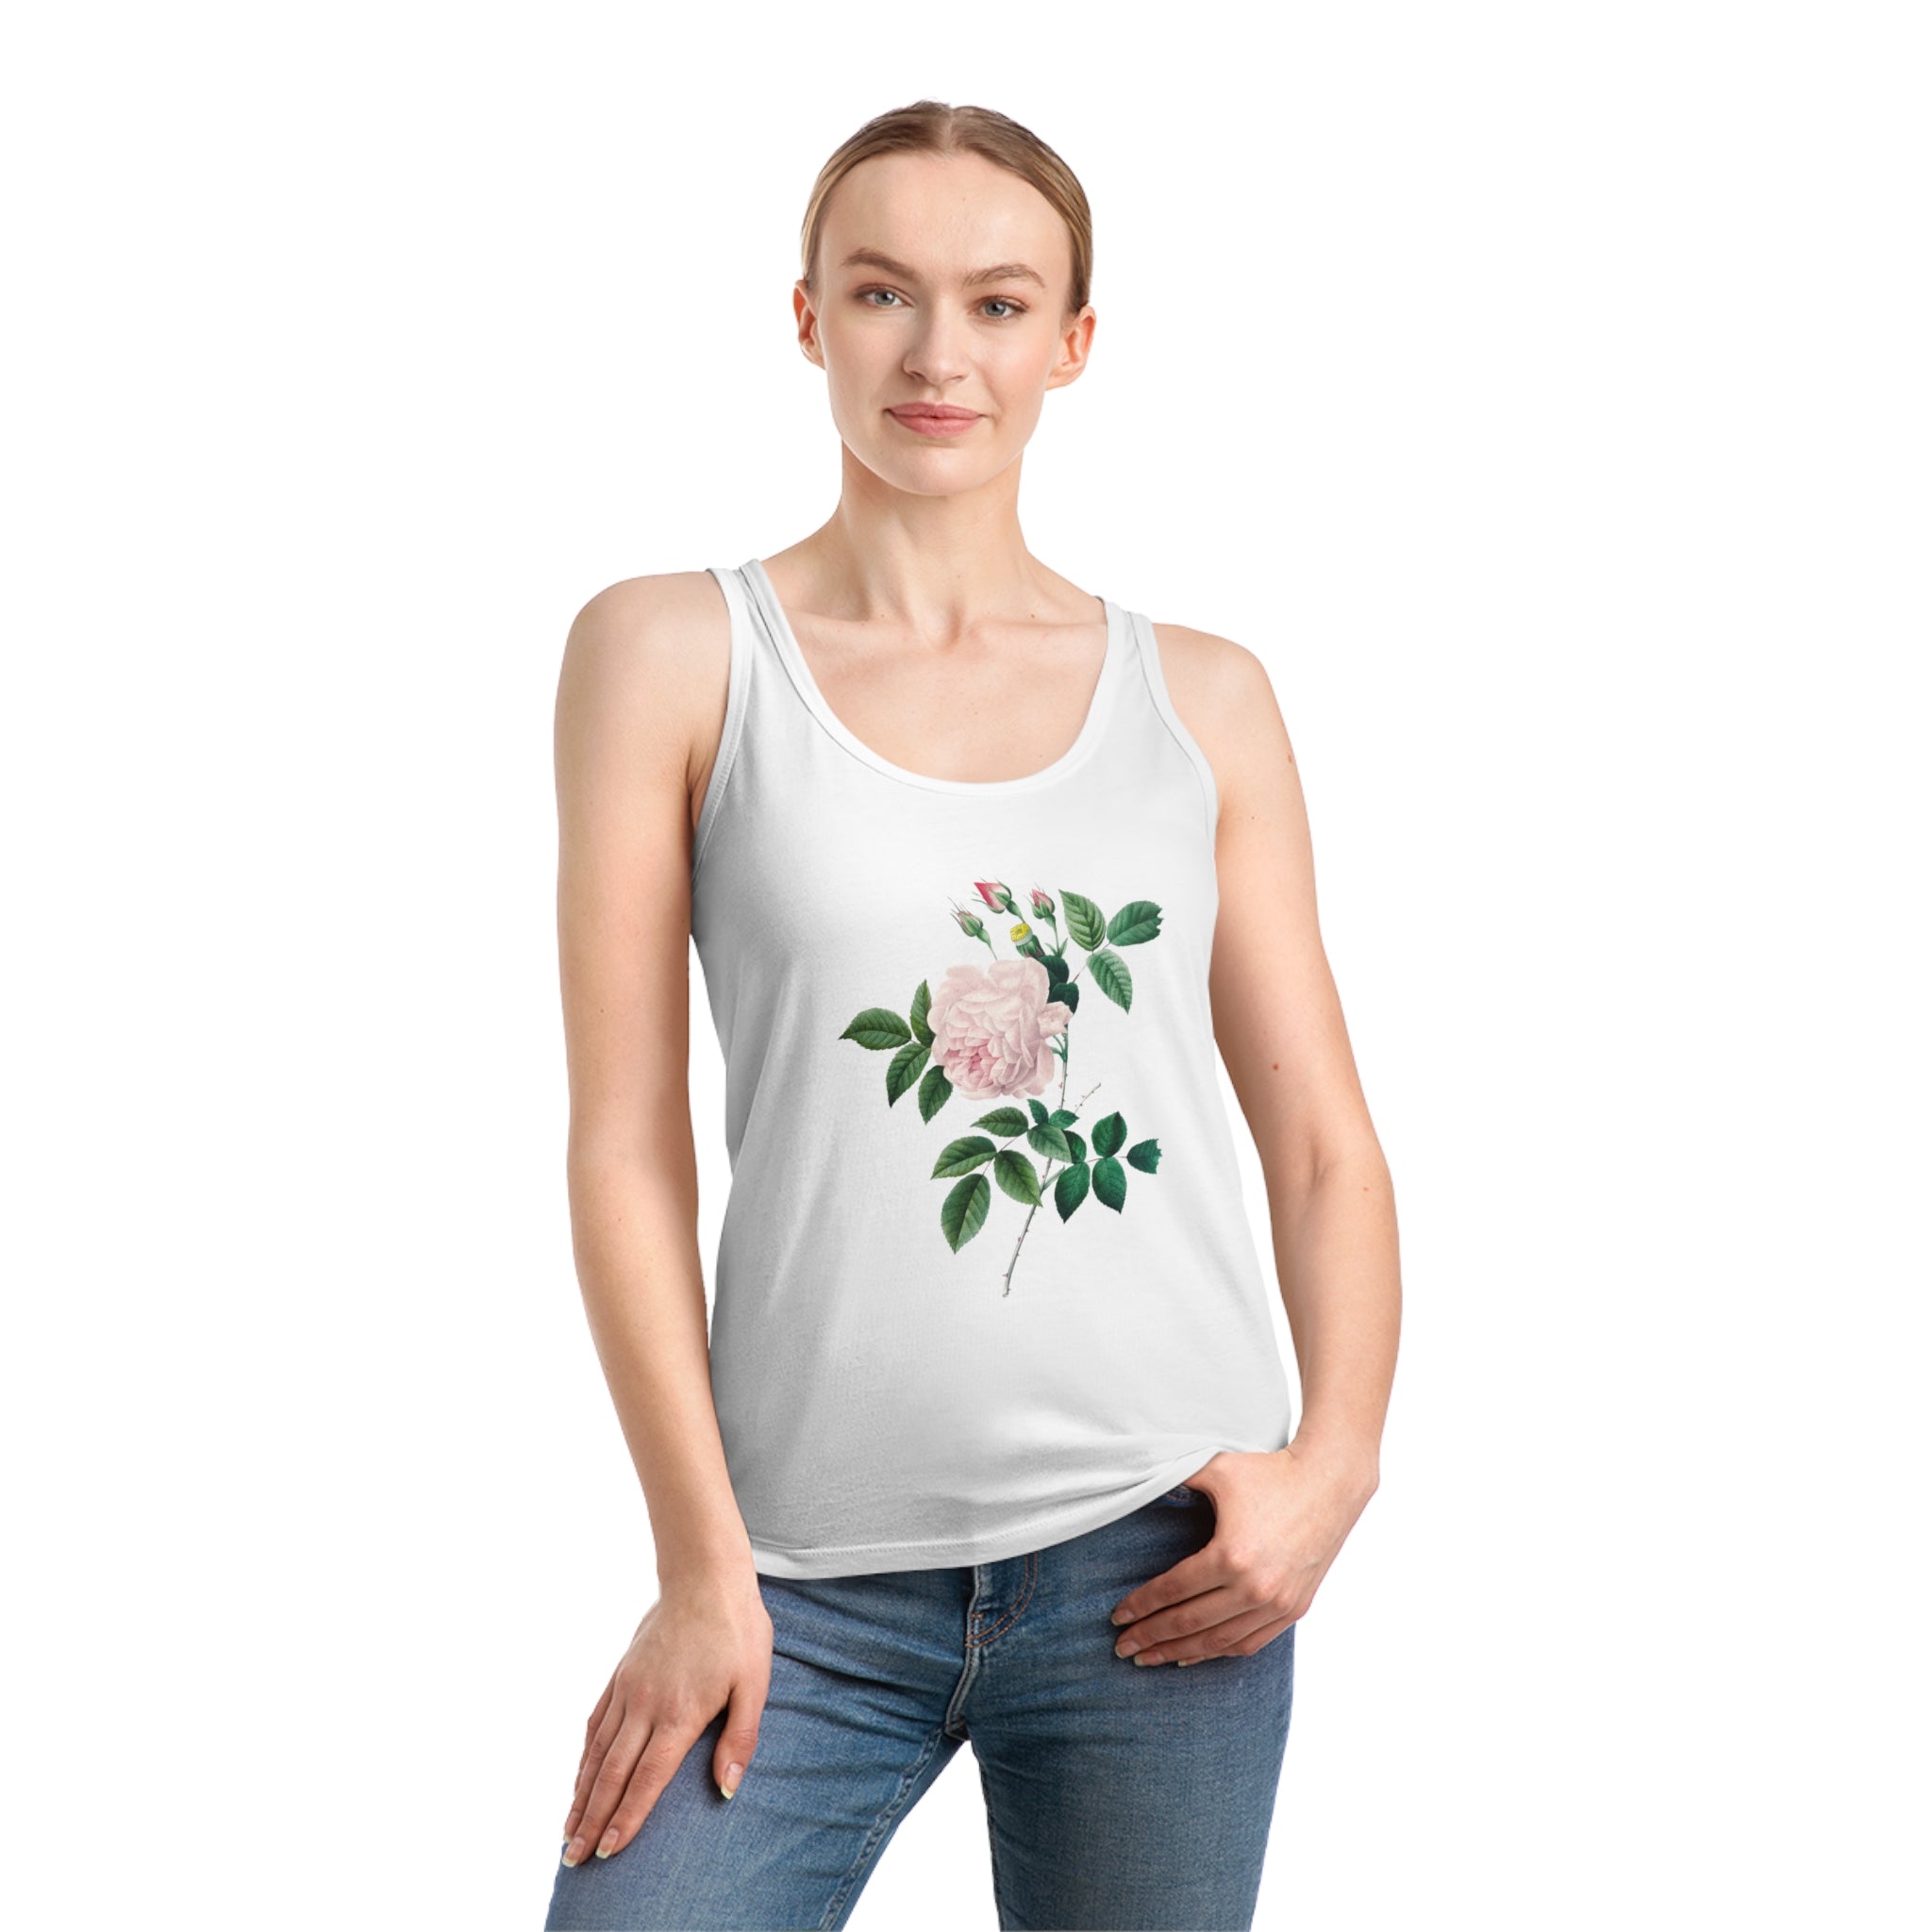 The Rose Tank Top is a perfect choice for any woman's yoga practice. Made from organic cotton, this tank top features a beautiful rose design, adding a touch of feminine elegance to your workout.